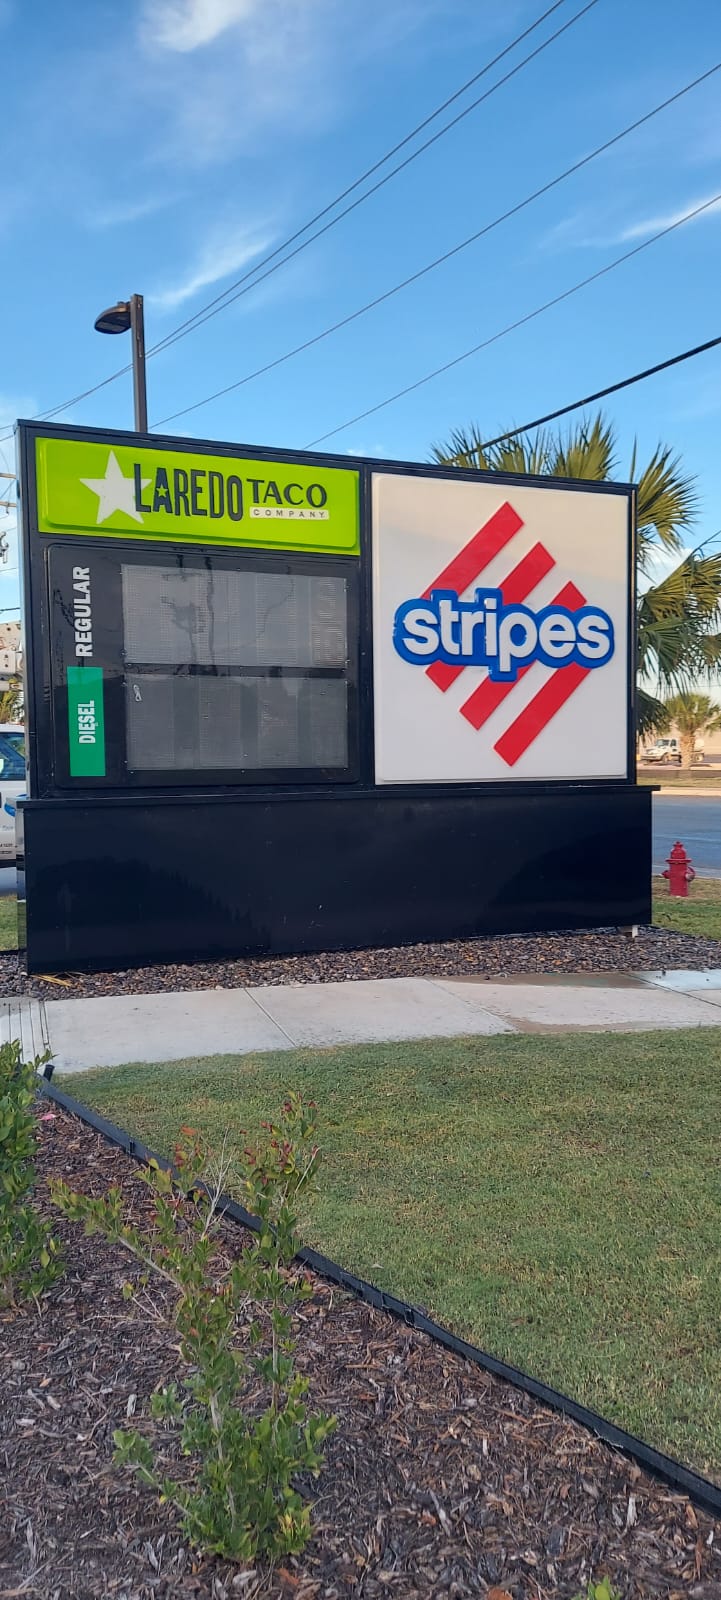 Elevated Stripes store presence with a renovated monument sign, integrating Laredo Taco Company branding.